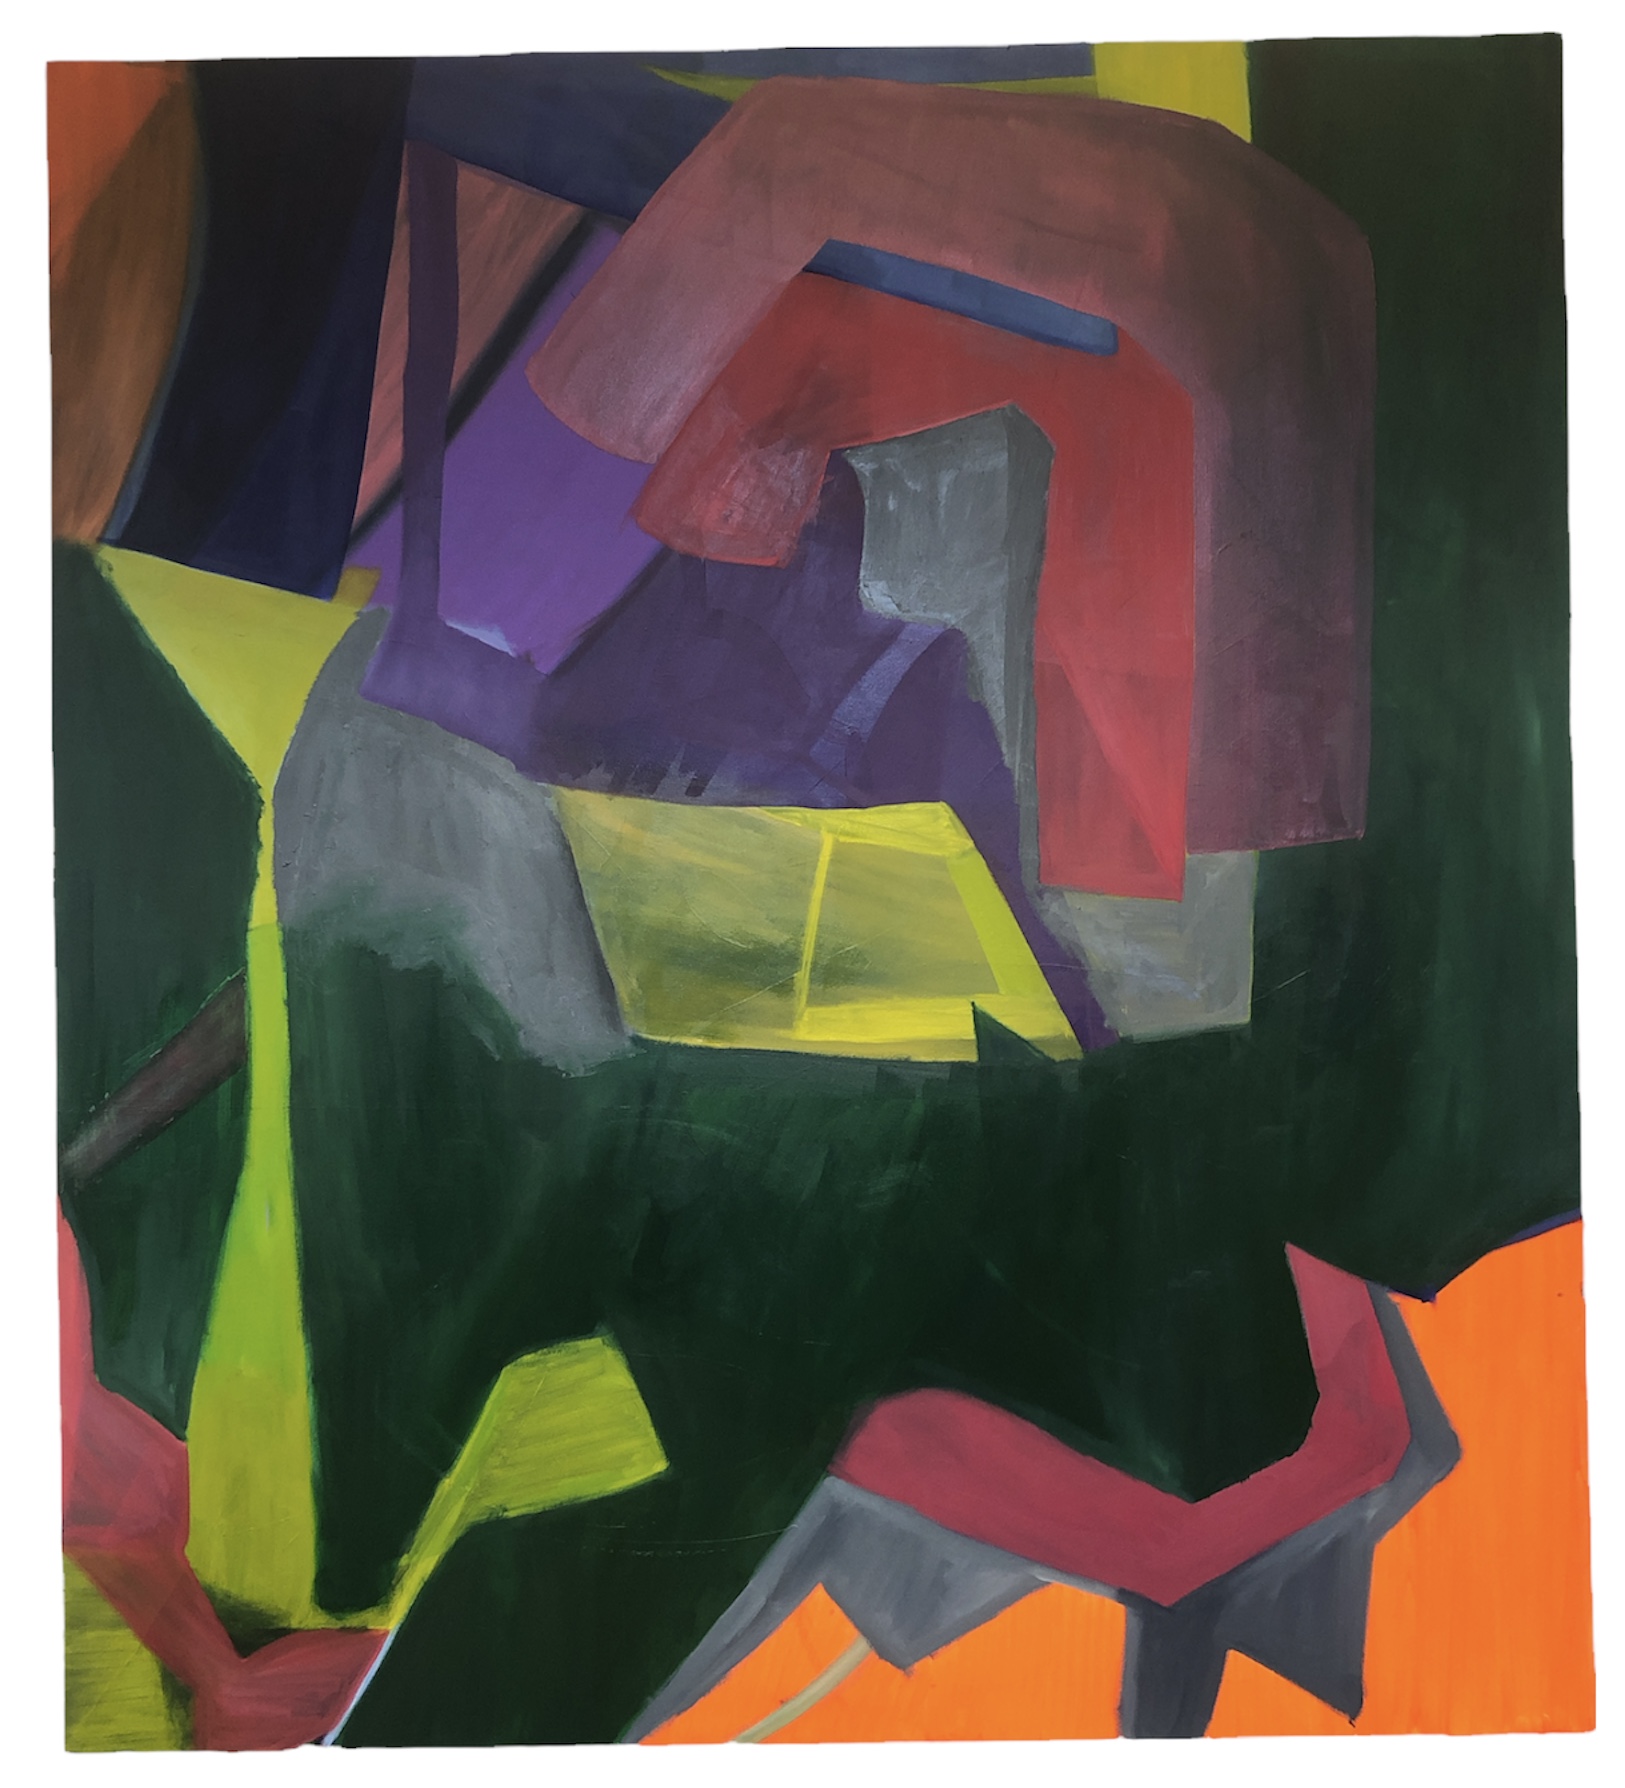 A colourful painting of abstract, Cubist shapes.